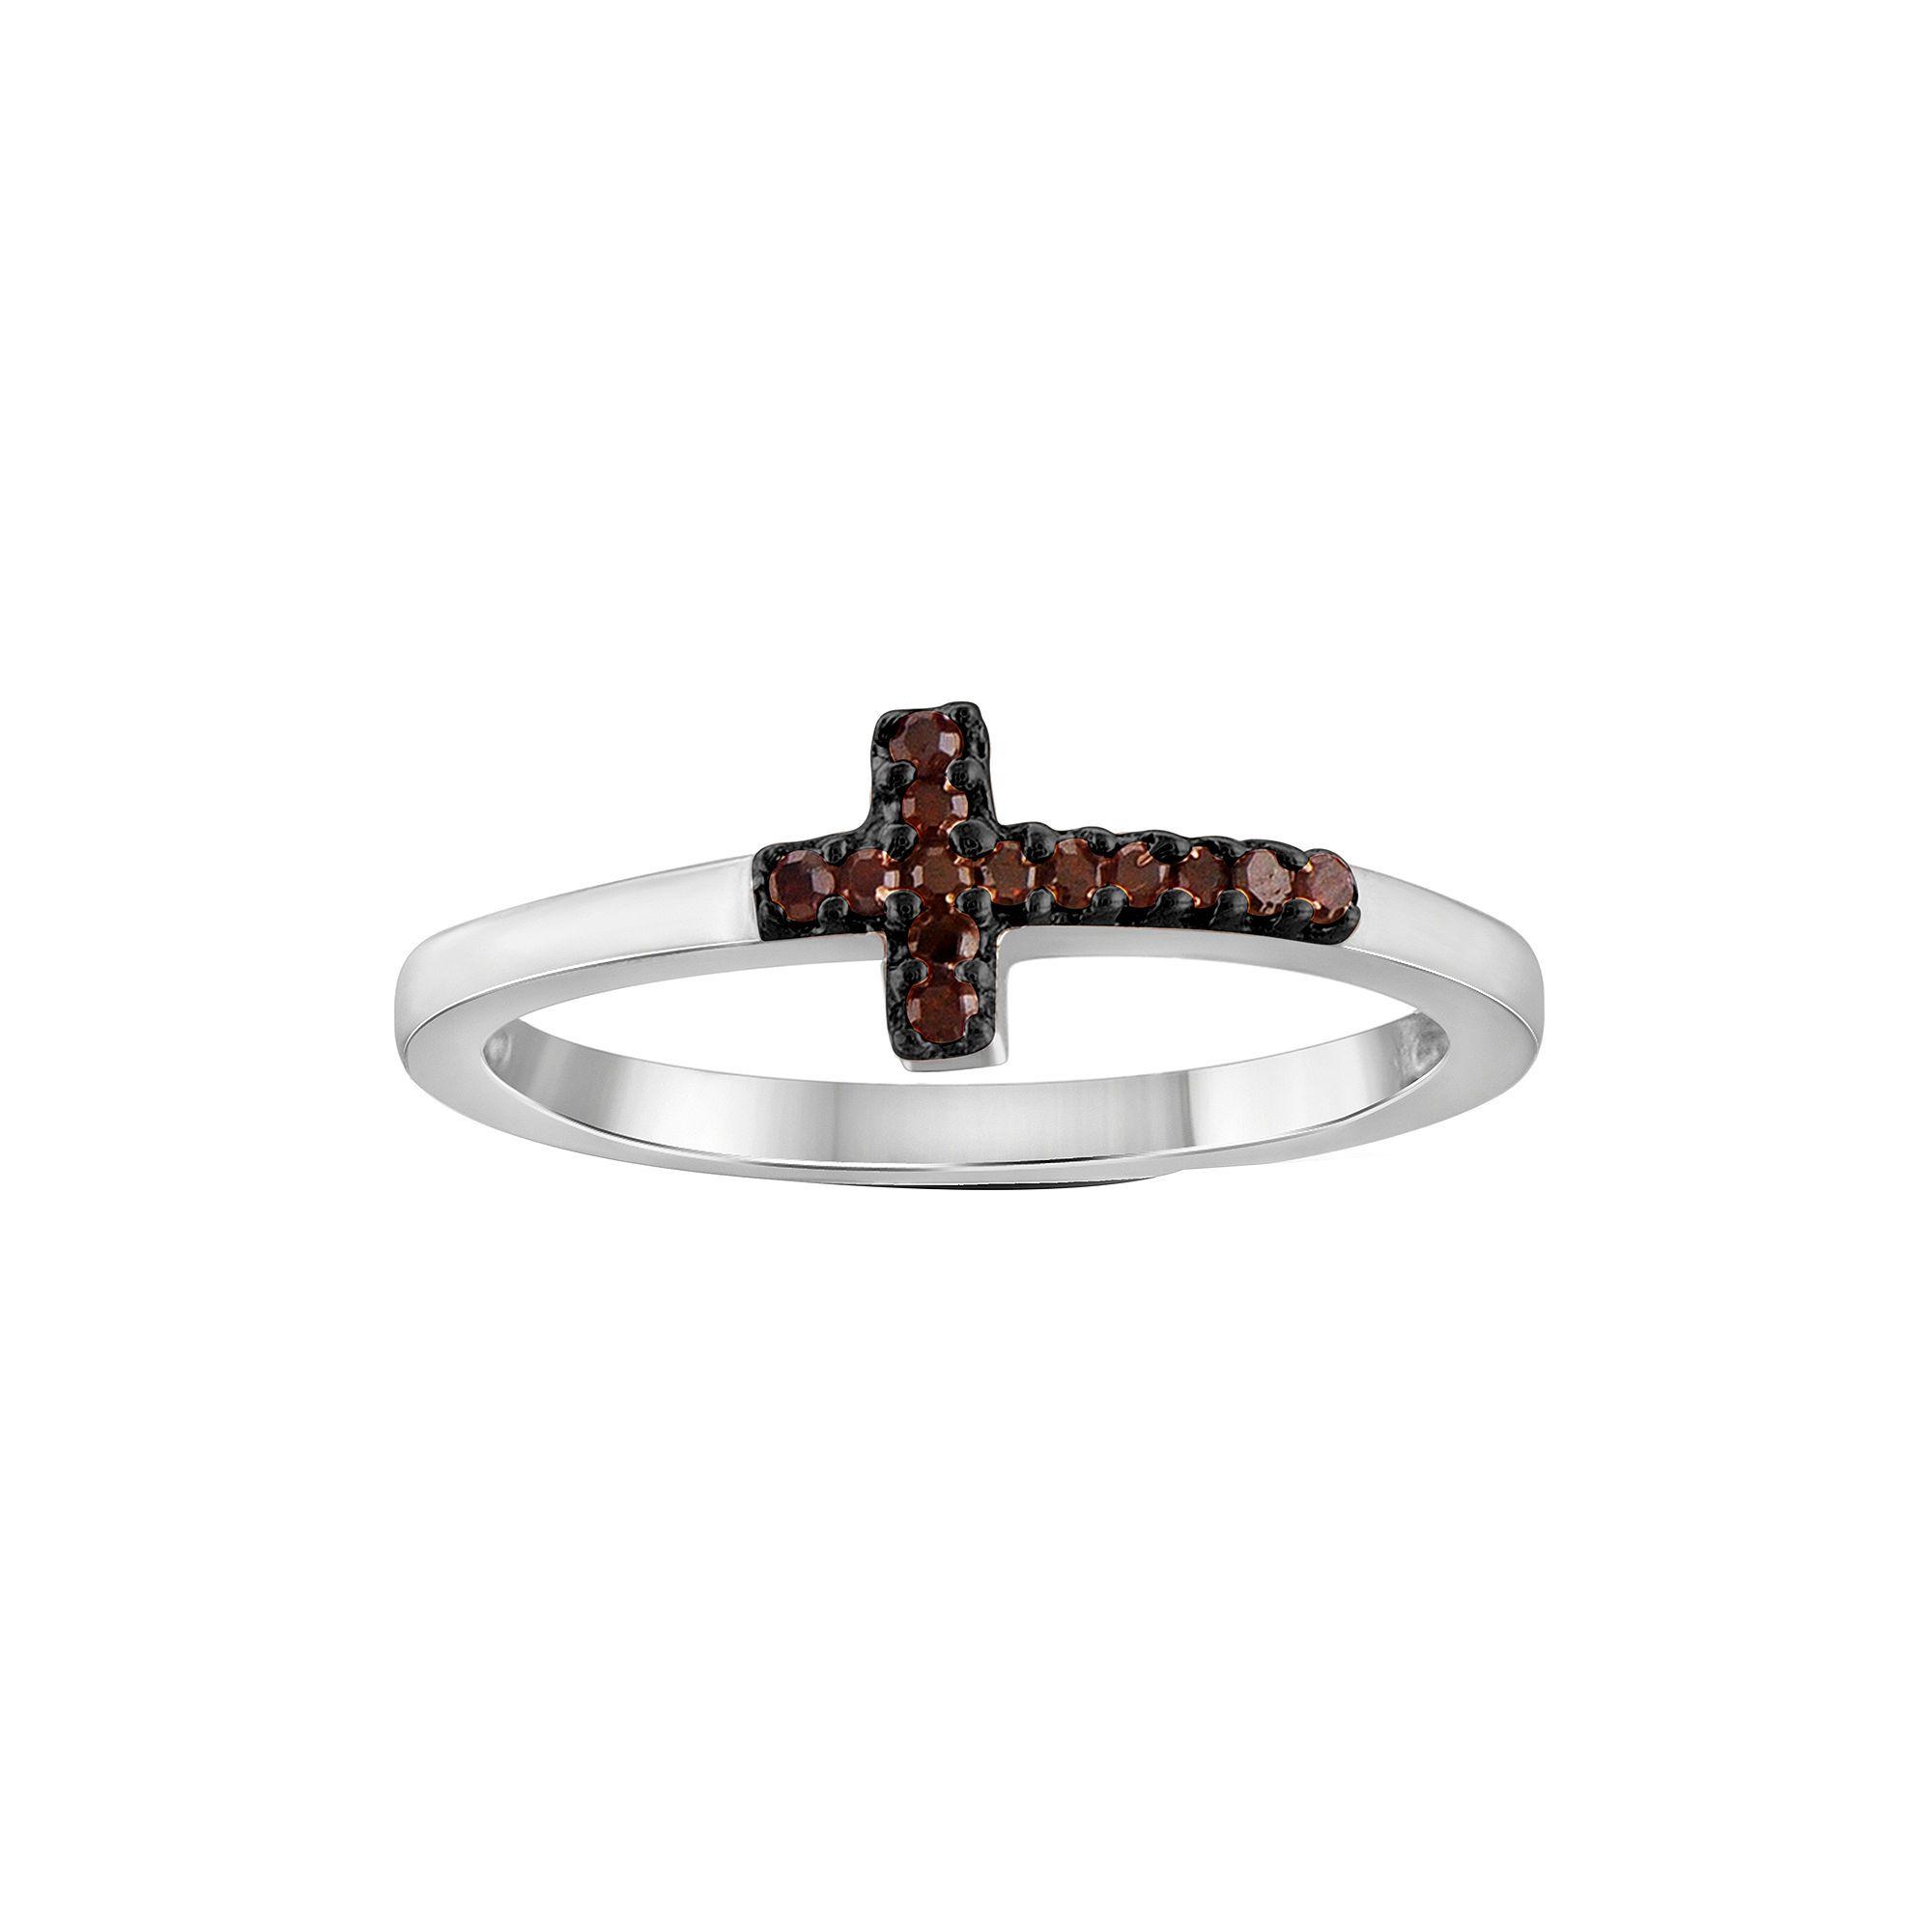 White Cross in Red Diamond Logo - BUY 1 10 CT. T.W. Color Enhanced Red Diamond Sterling Silver Cross Ring